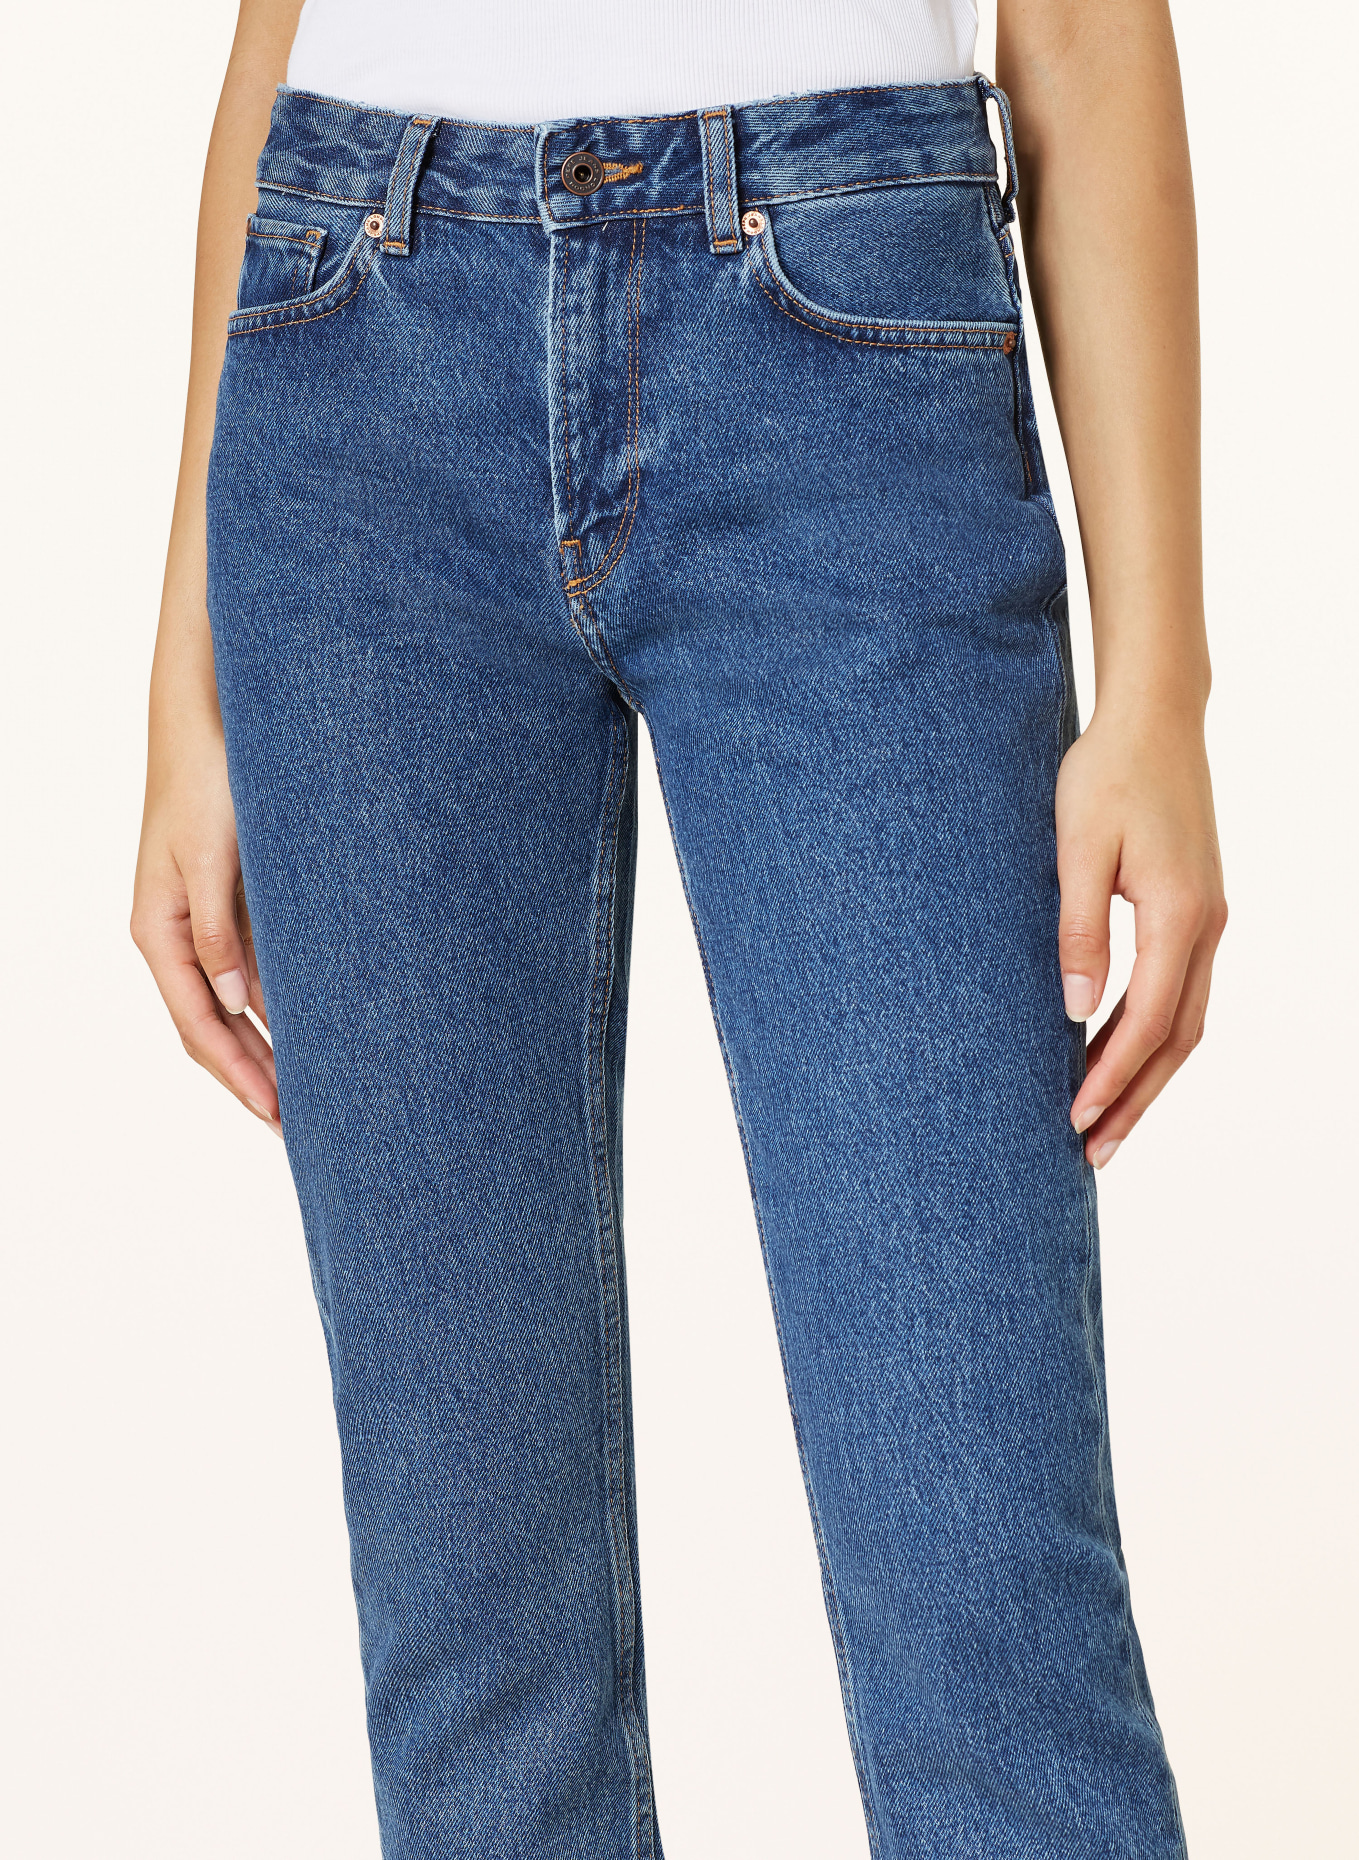 Pepe Jeans Straight jeans, Color: 0000 Denim (Image 5)